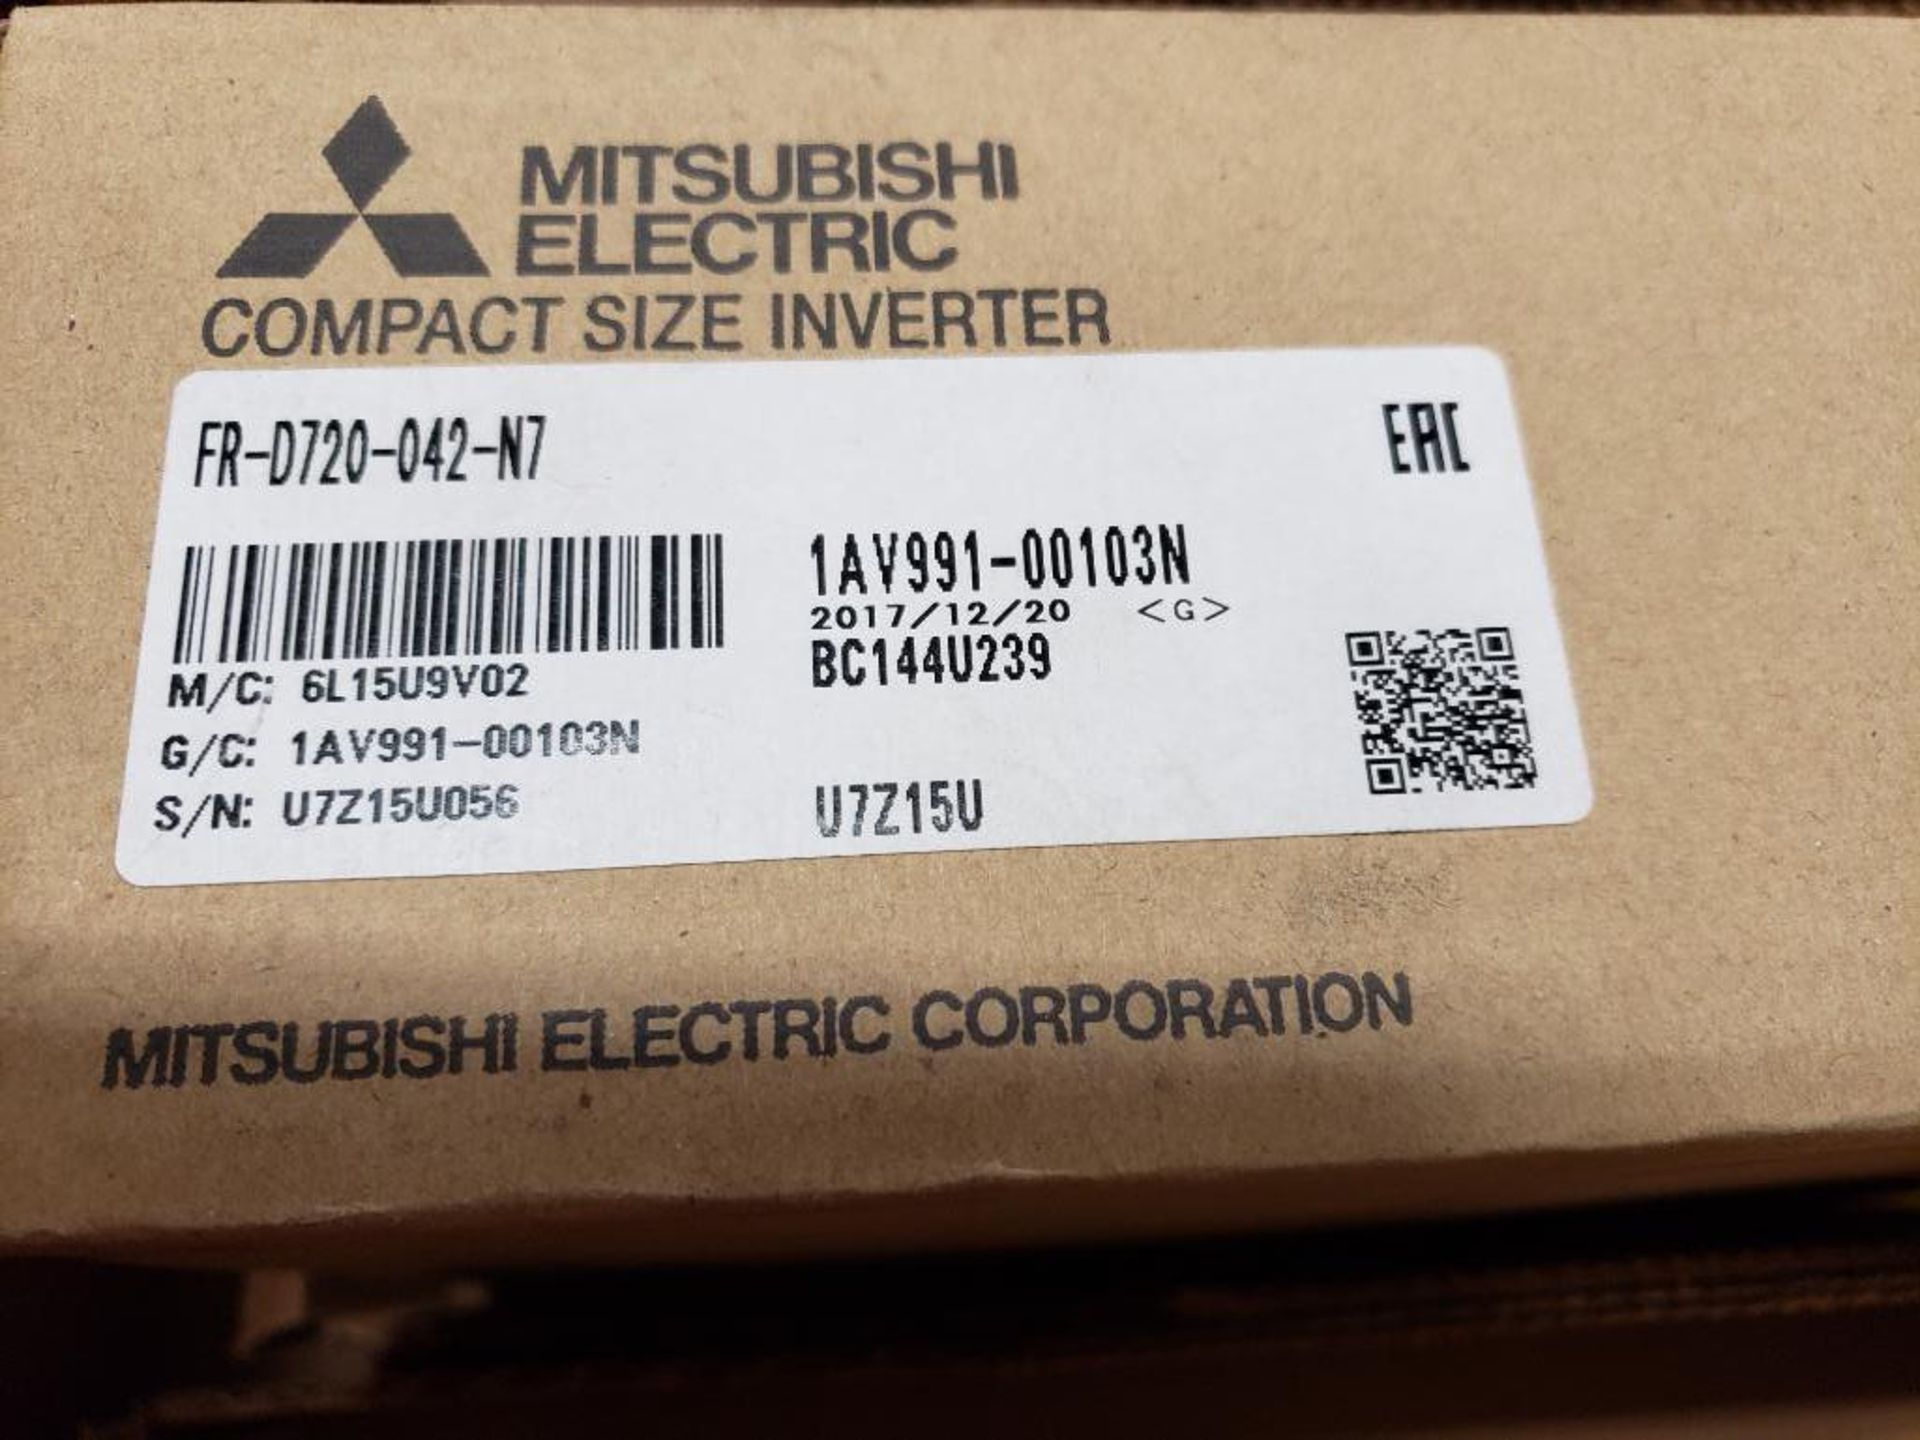 Mitsubishi Electric FR-D720-042-N7 compact size inverter. New in box. - Image 2 of 3